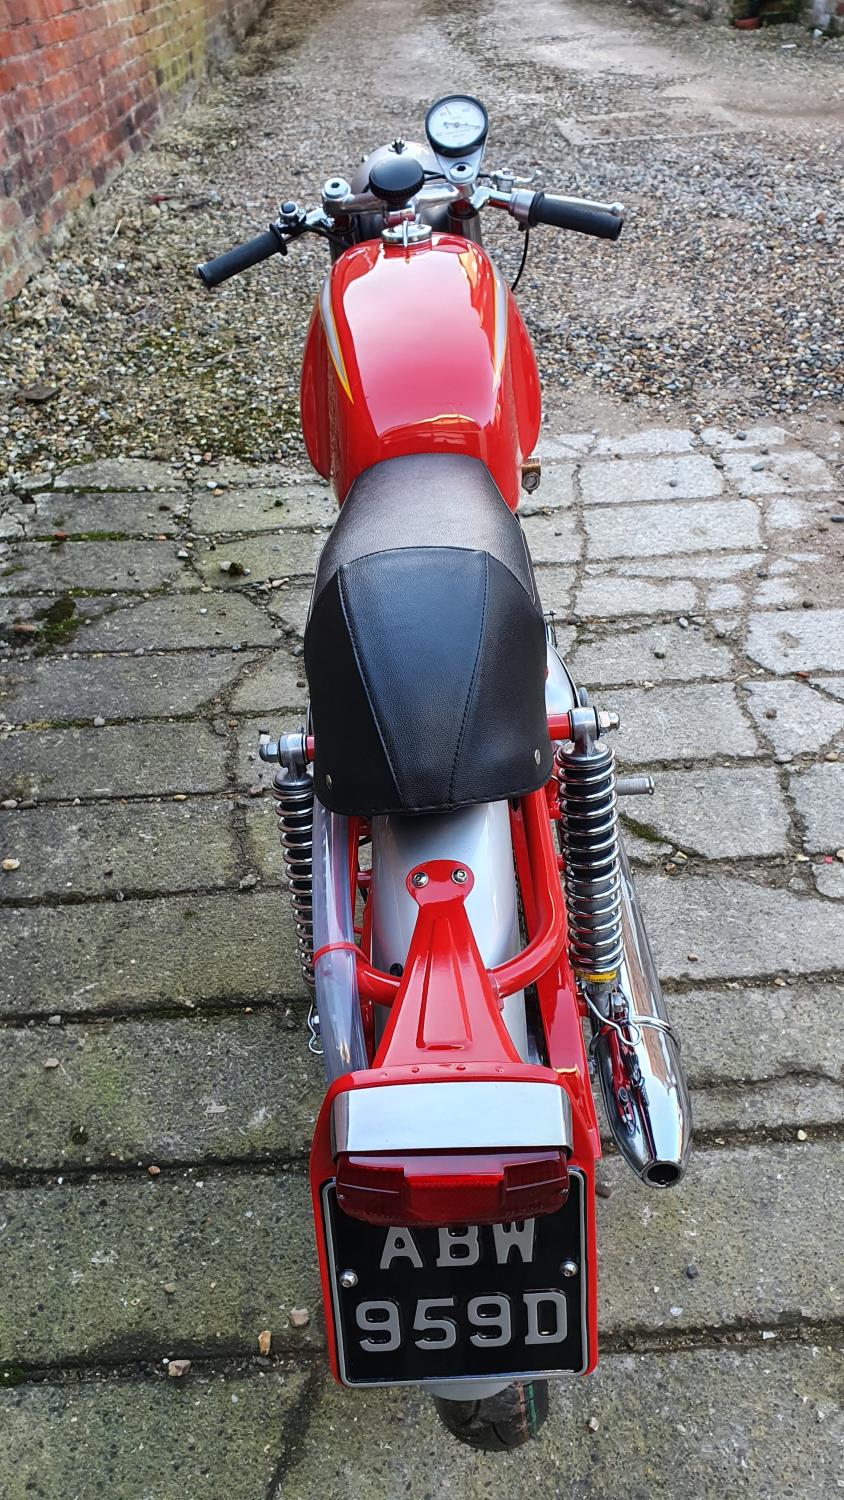 1966 Ducati Mach 1, 250 cc. Registration number ABW 959D. Frame number not stamped. Engine number - Image 4 of 13